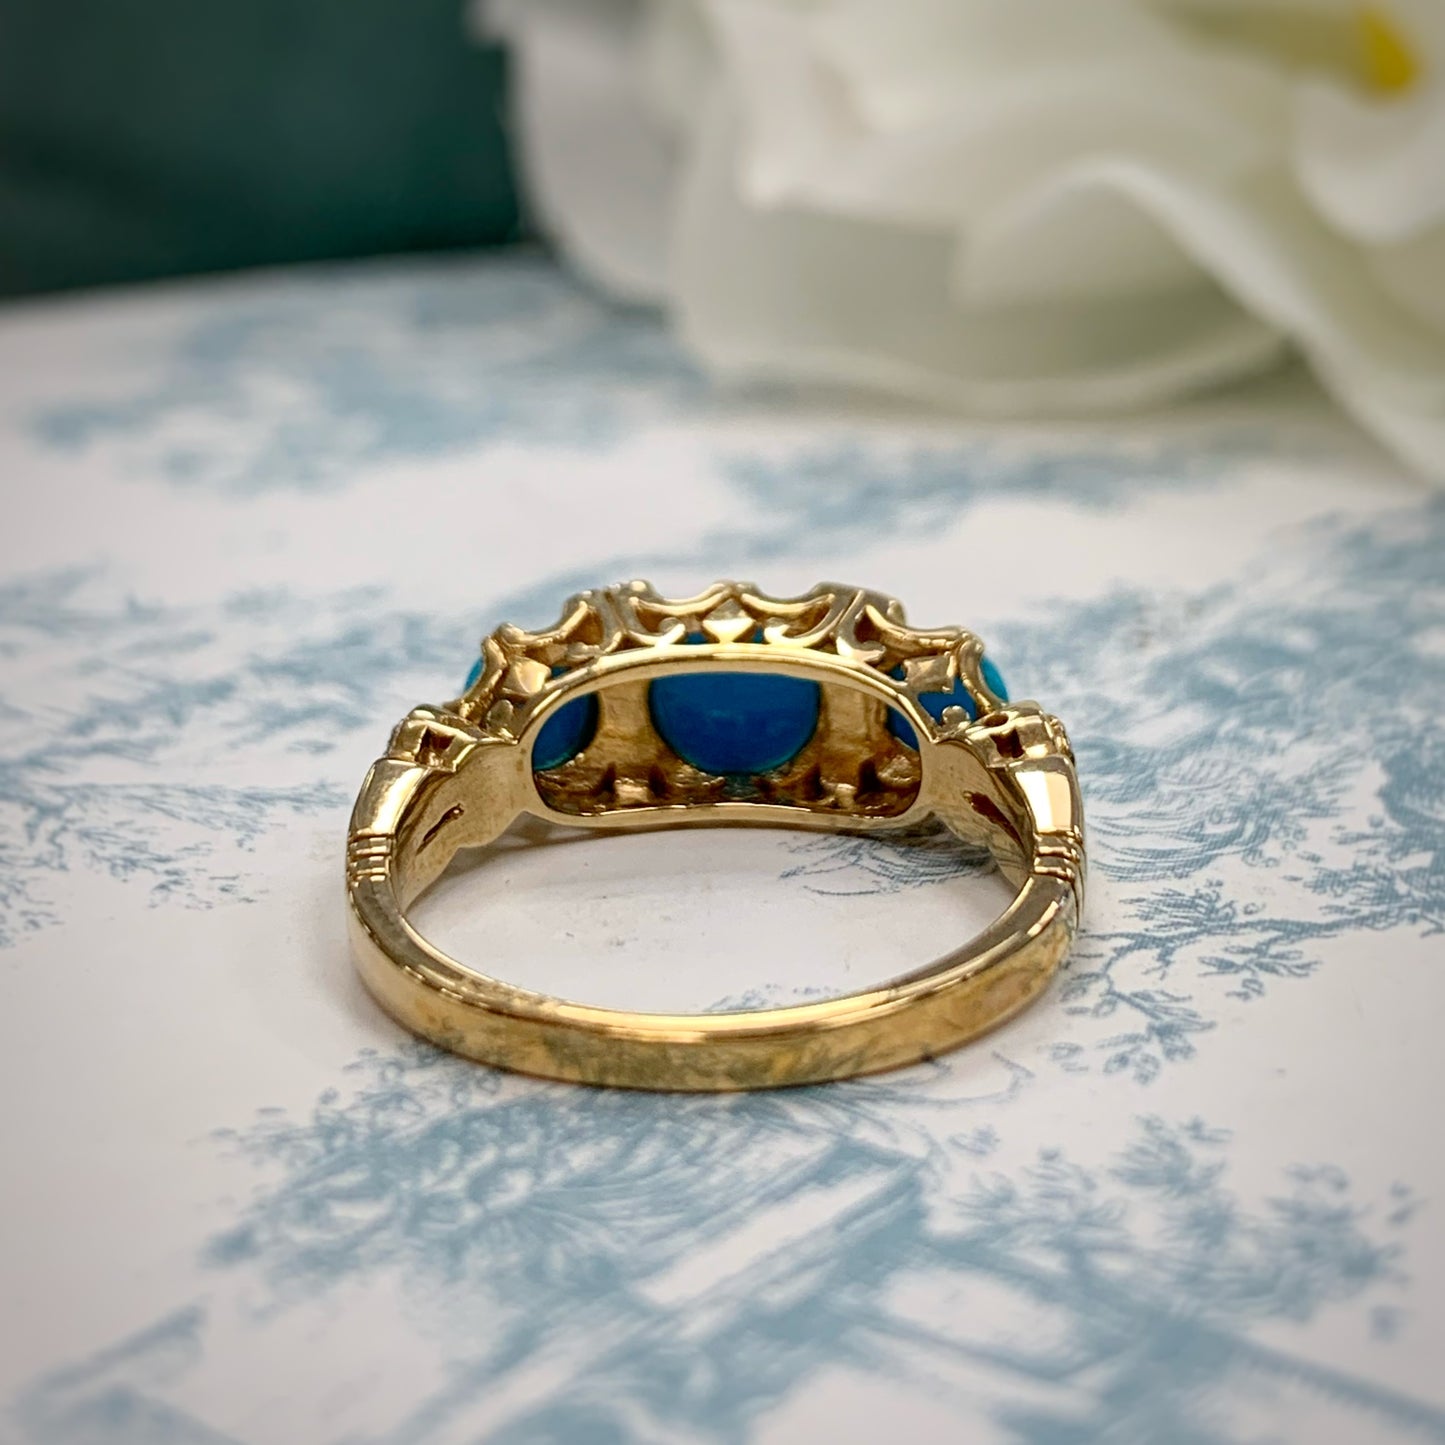 Edwardian Inspired 9ct Yellow Gold Turquoise and Diamond Ring - SIZE M 1/2